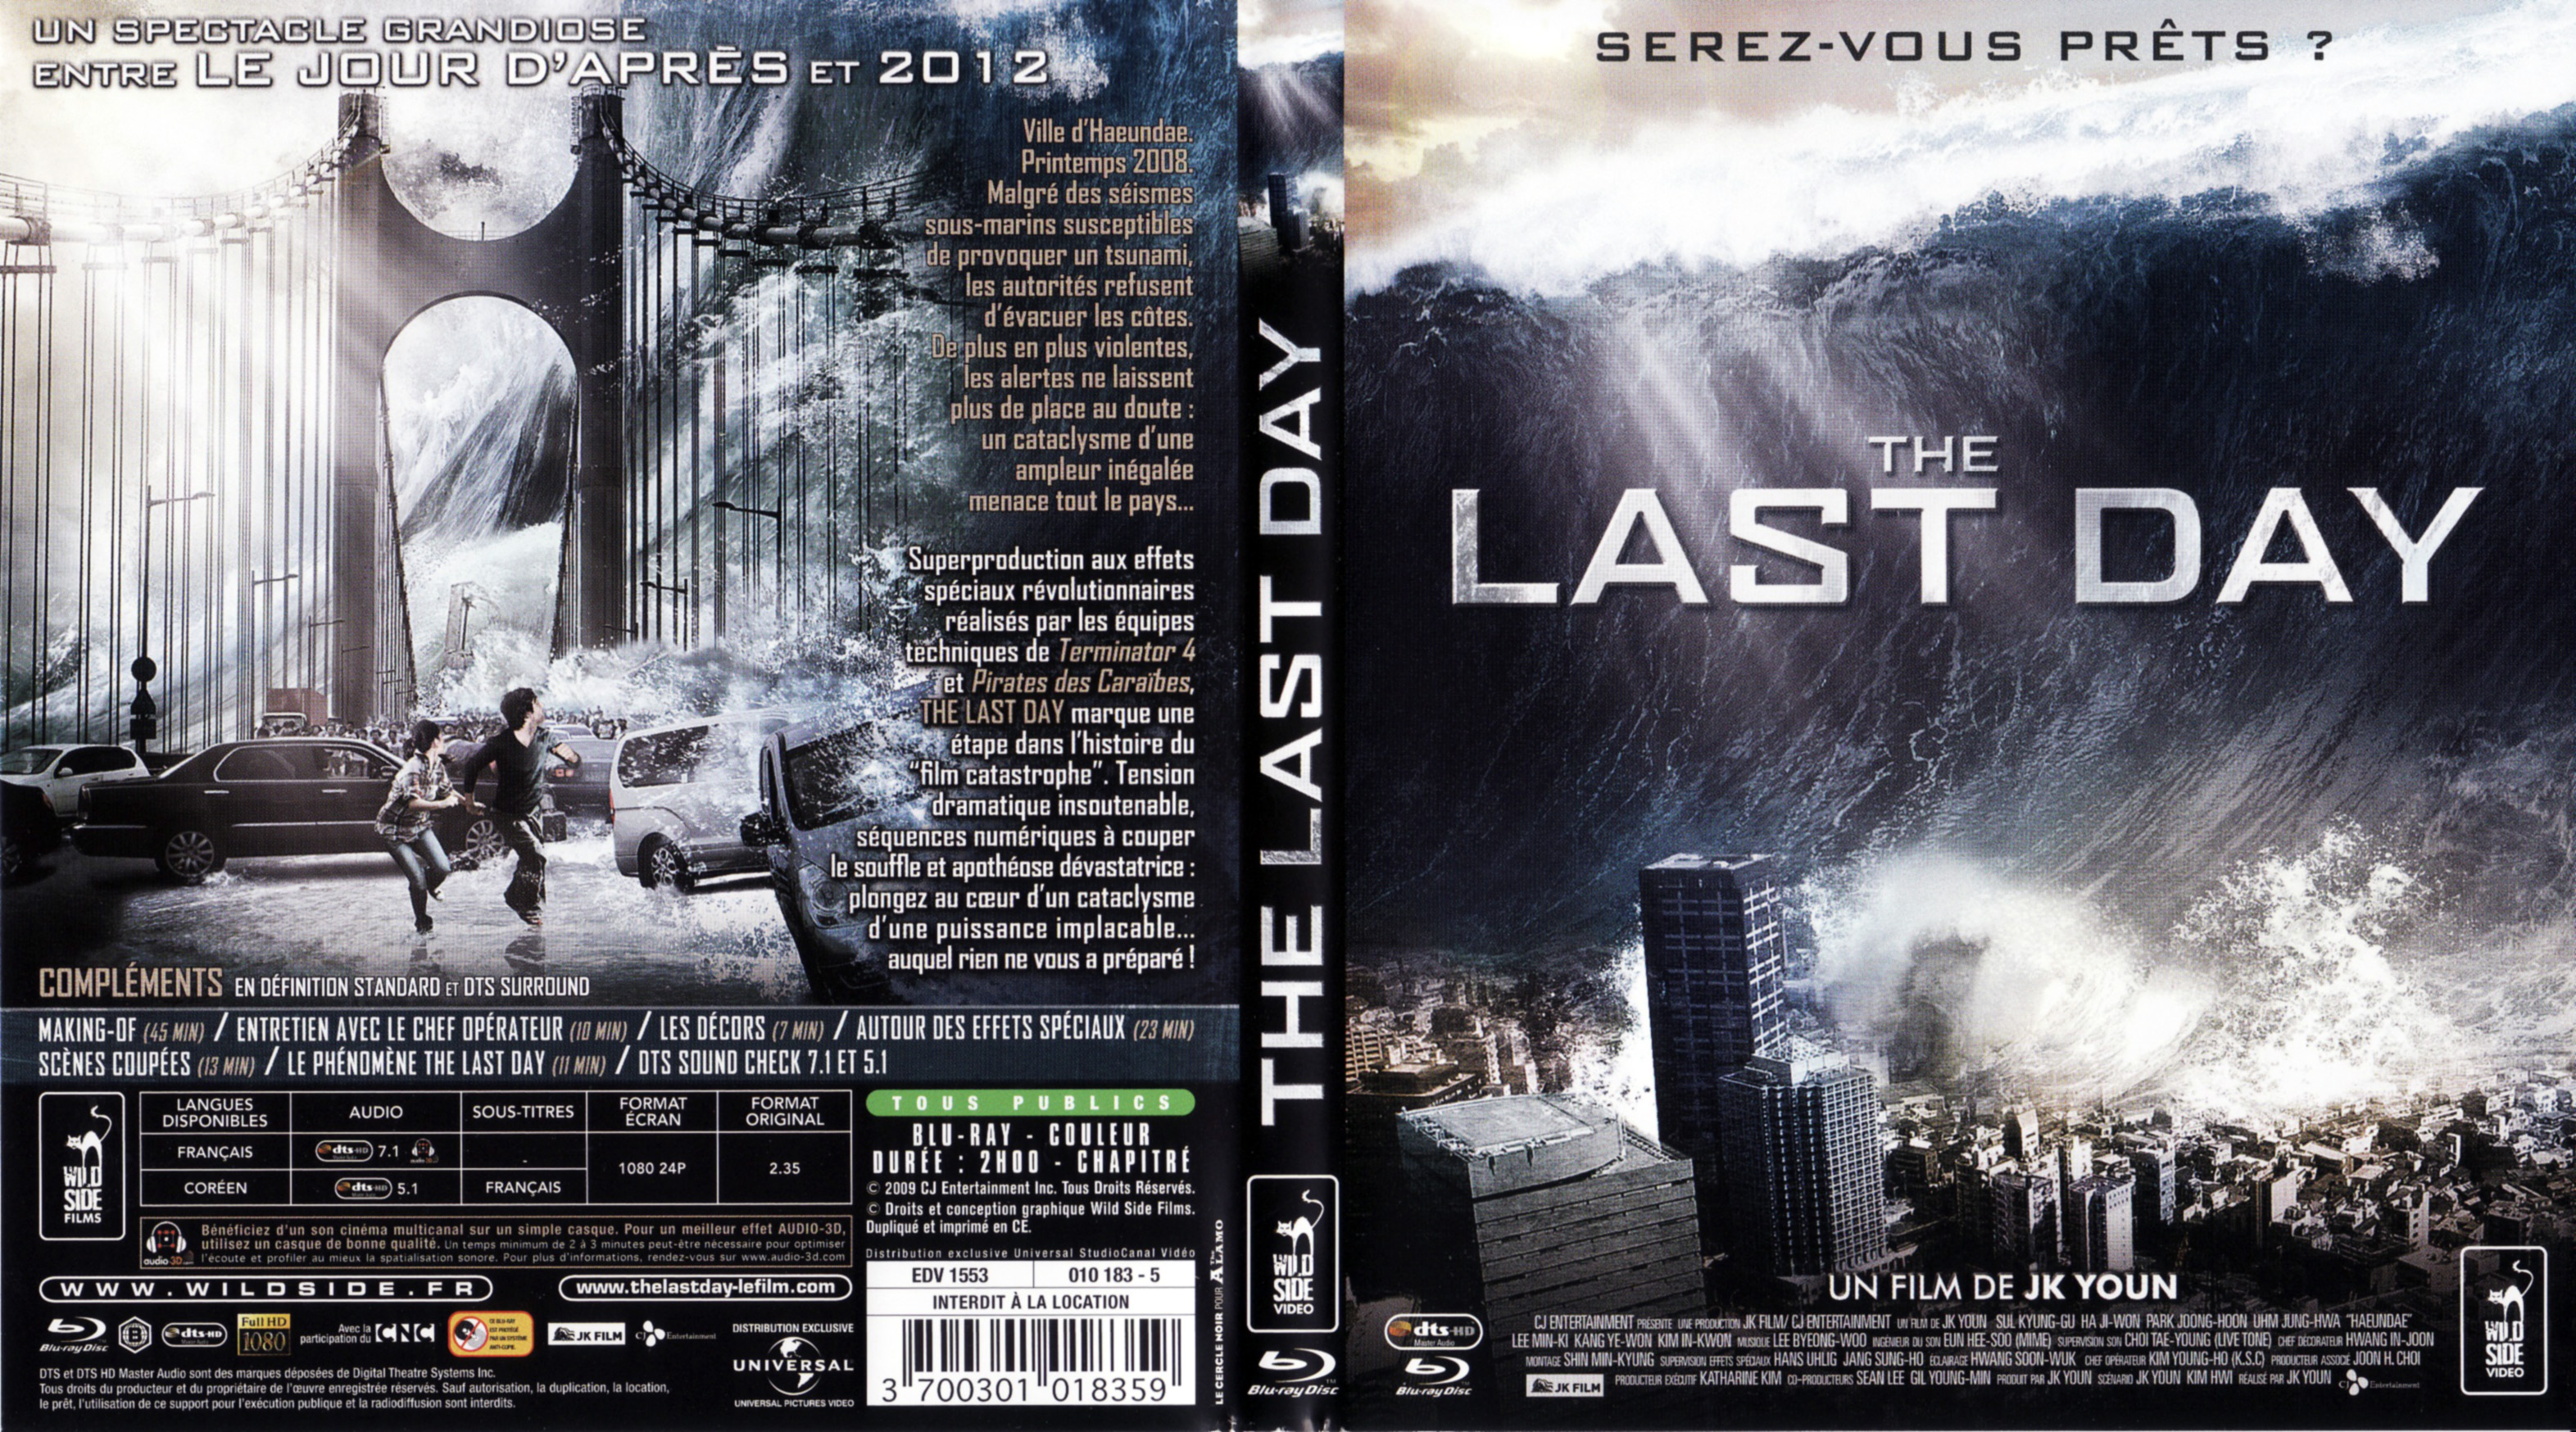 Jaquette DVD The last day (BLU-RAY)